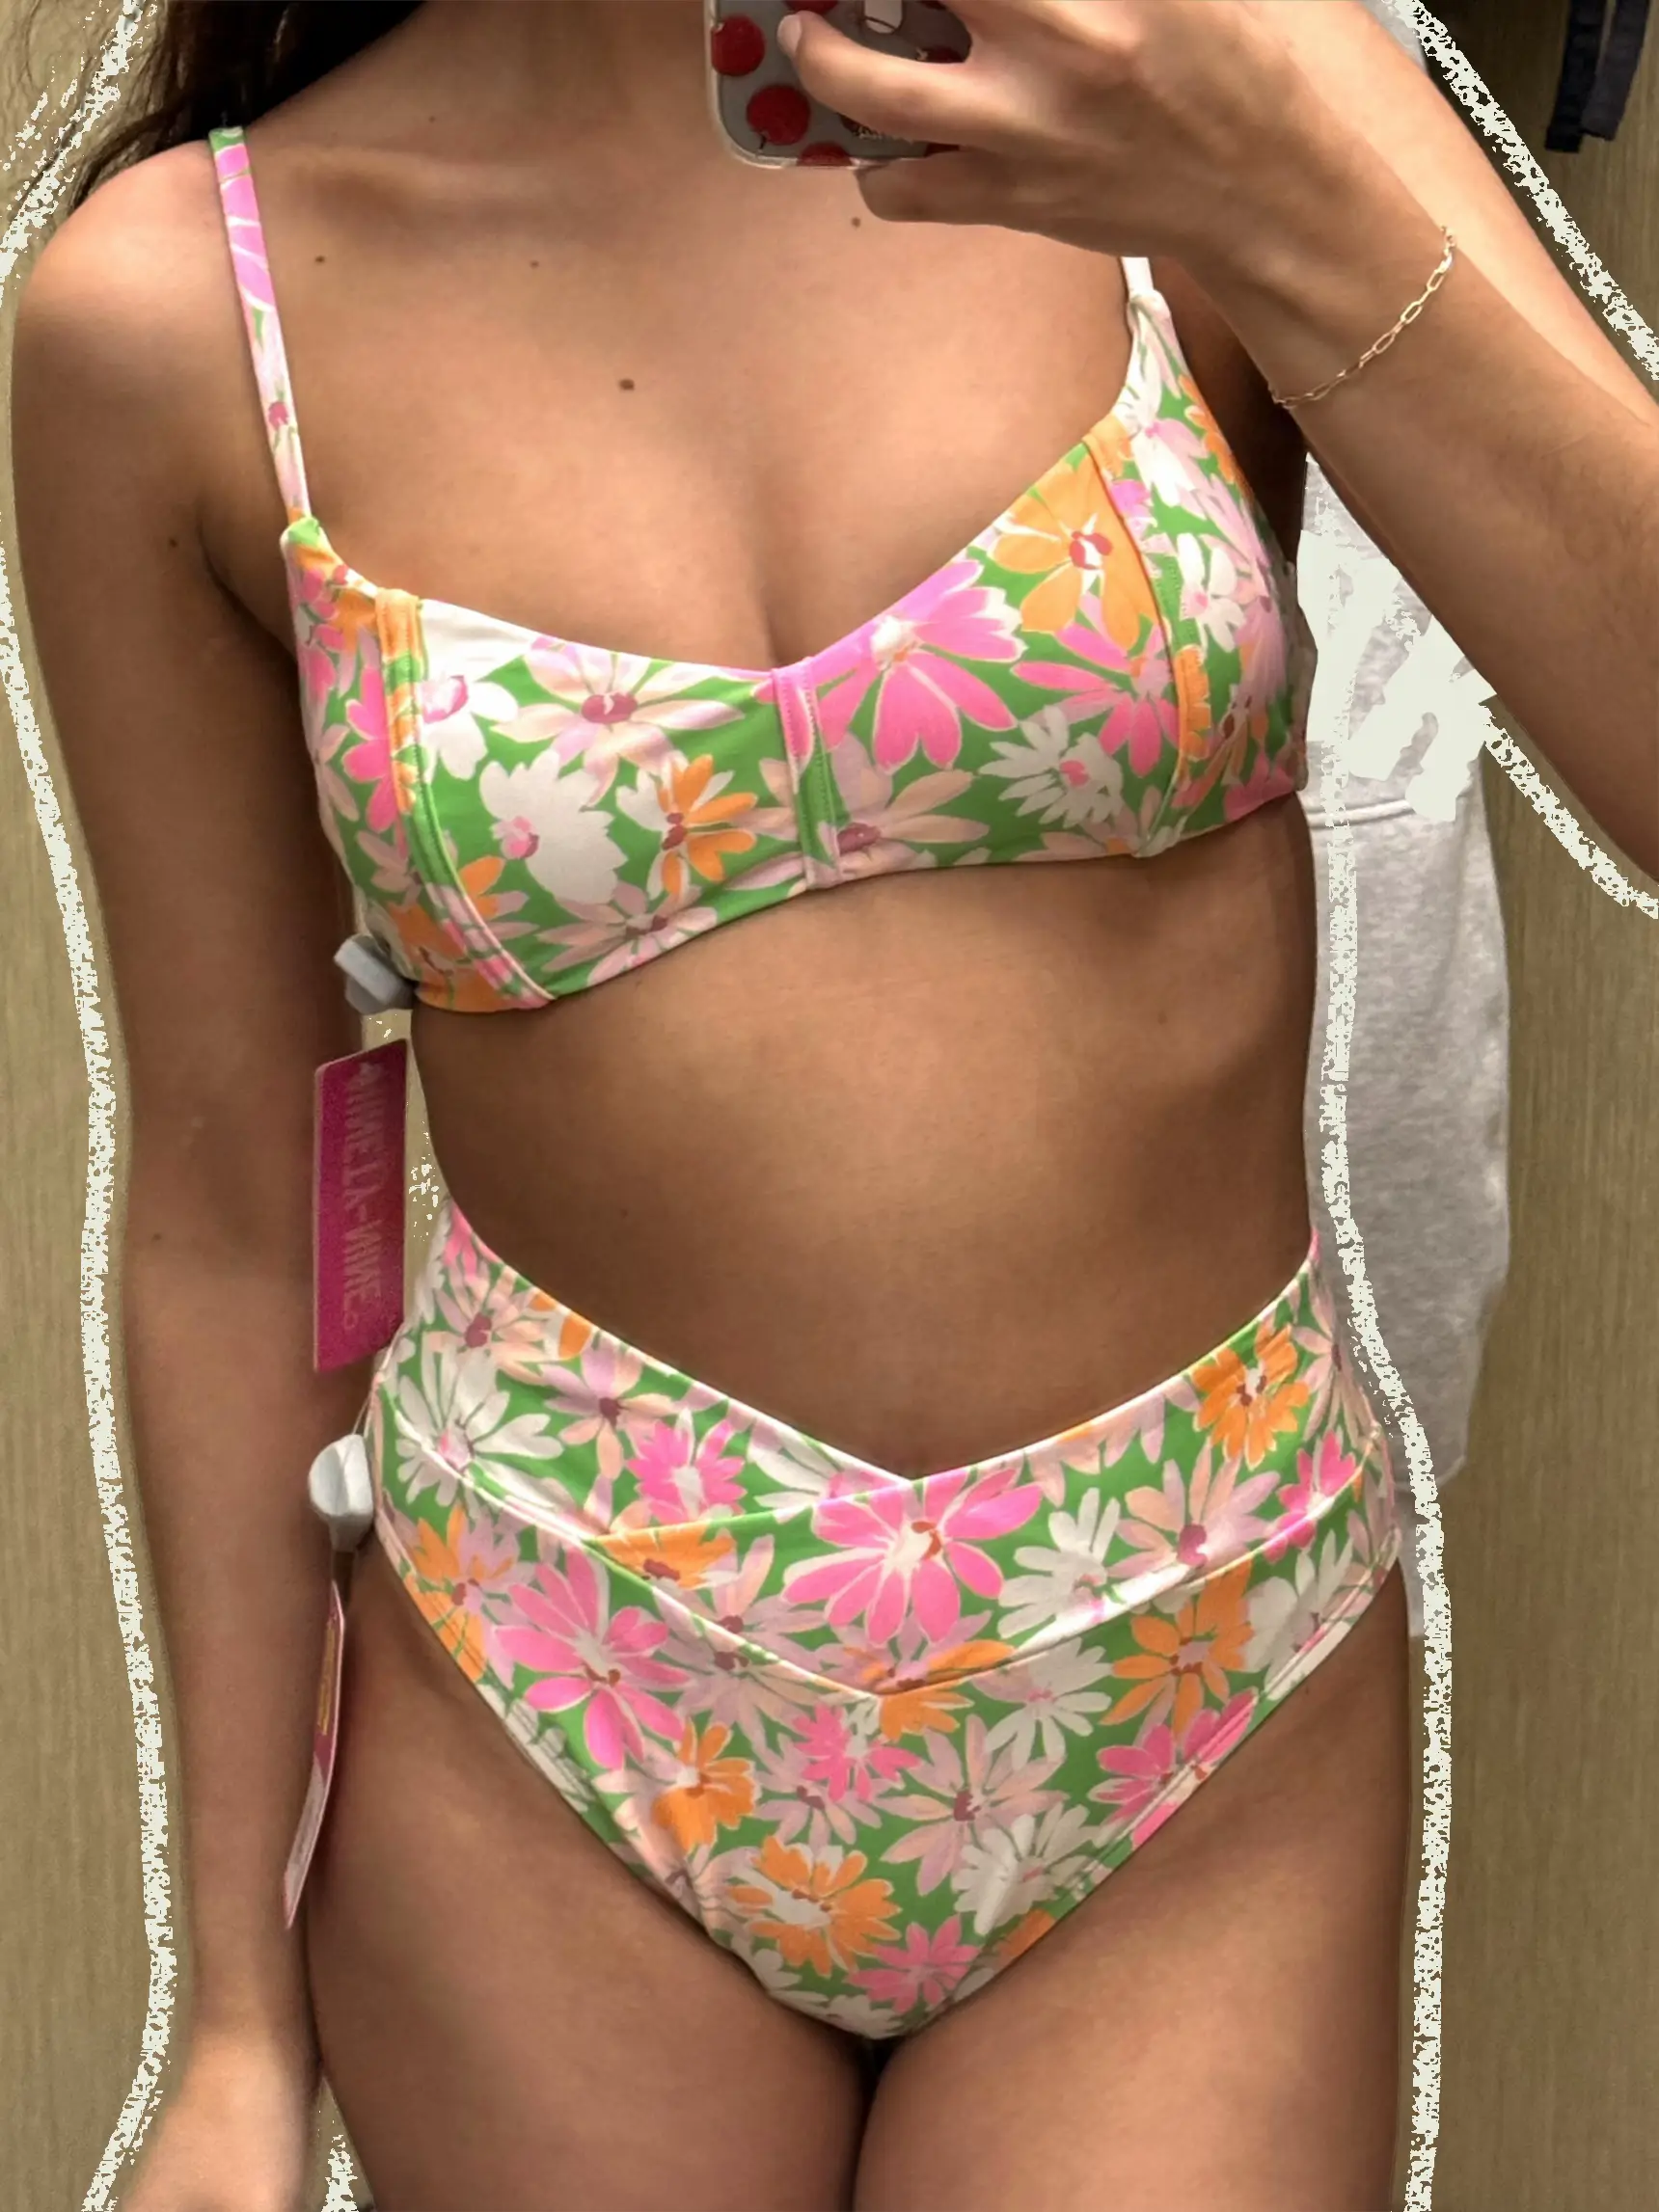 amanda marshall, had to share ✌🏻new bikinis because right now all tops &&  bottoms are on sale for $20!! both run true to size (wearing xs).  #swimsuit